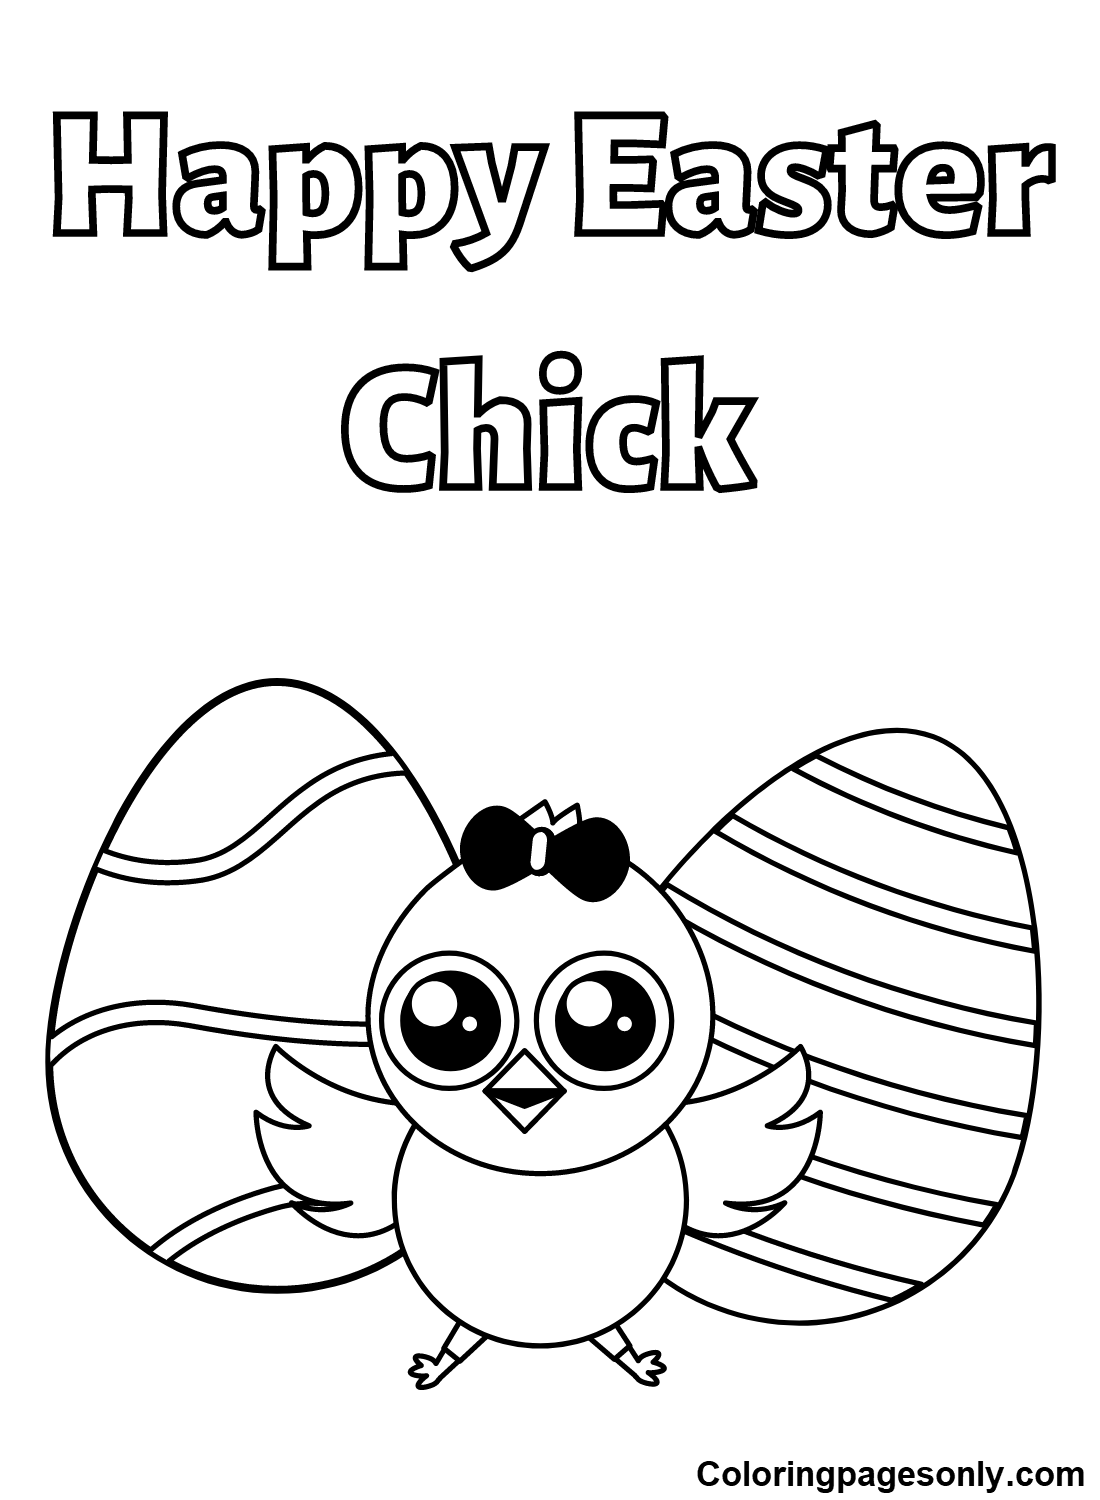 Cute Chick Easter Coloring Pages